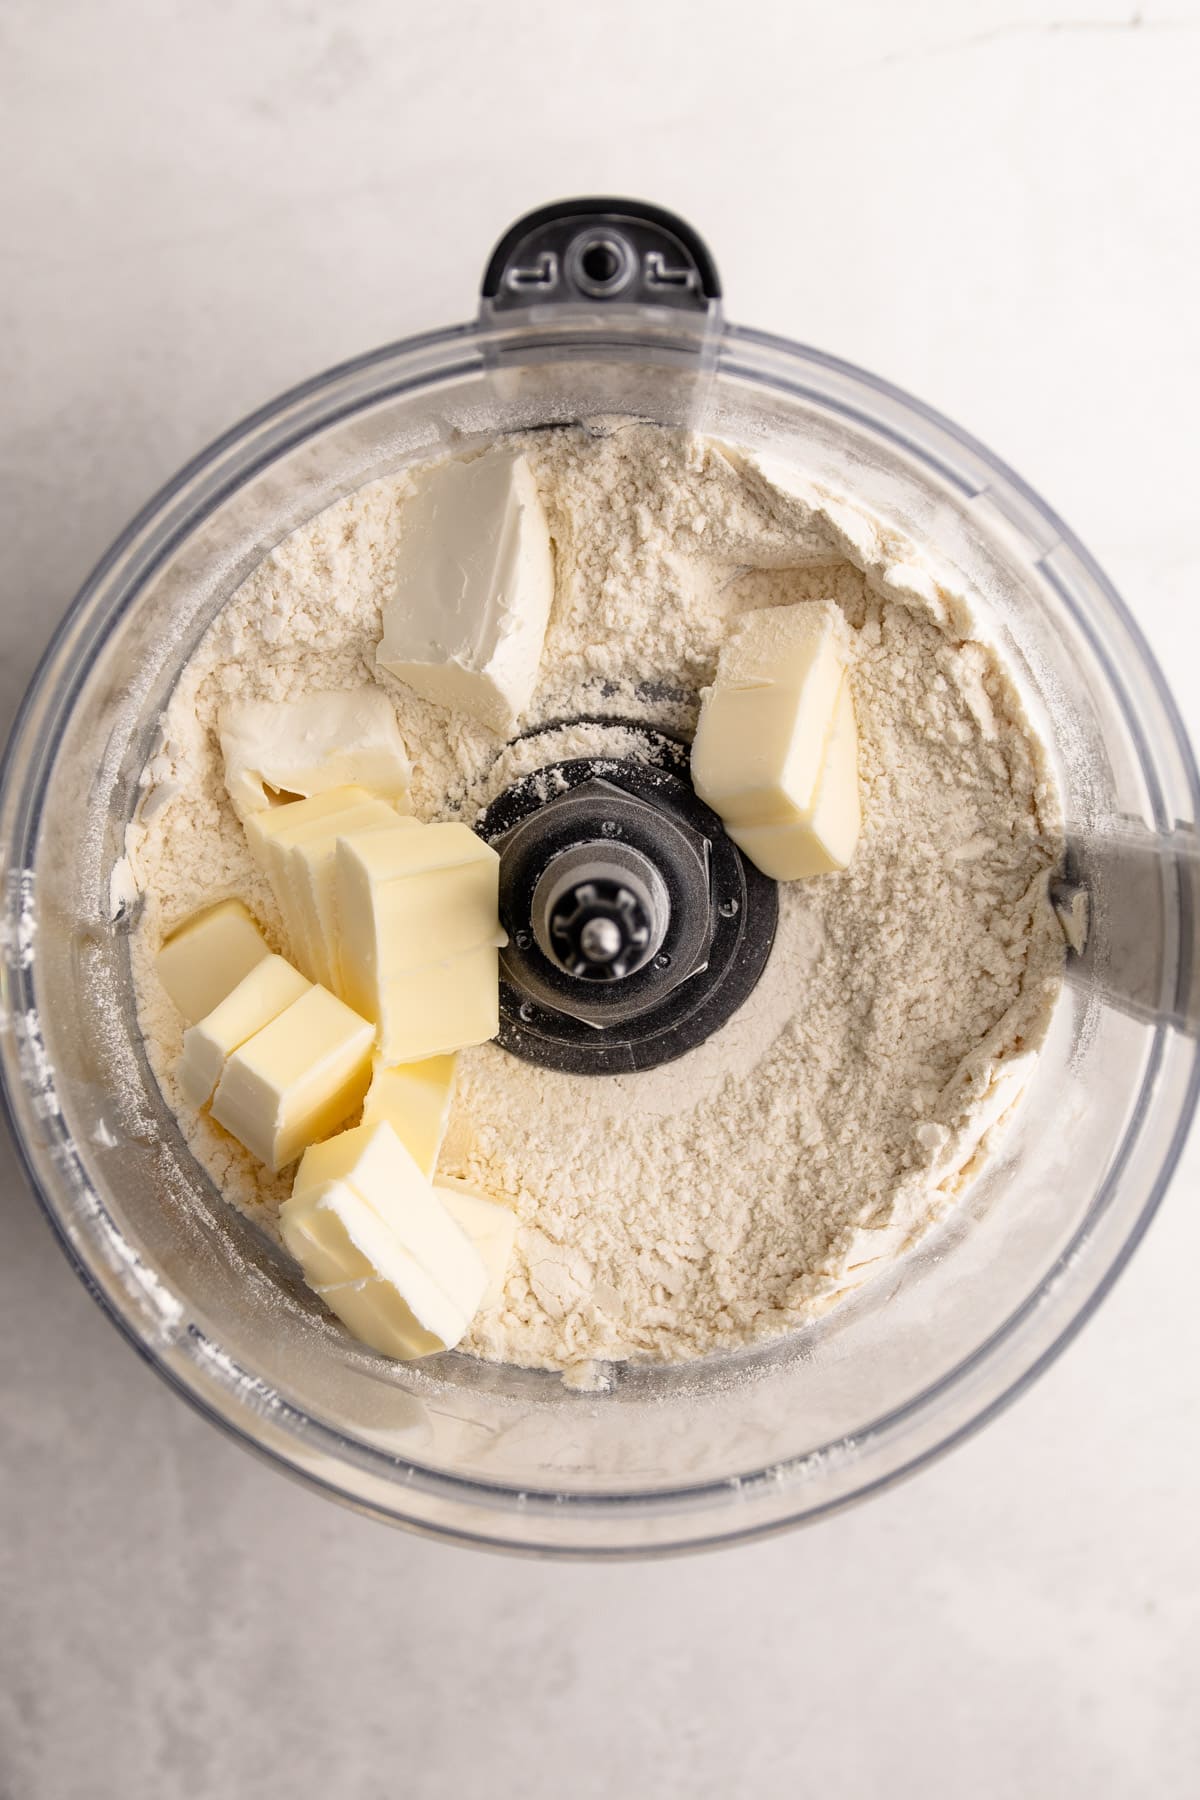 Ingredients in a food processor for pie crust.